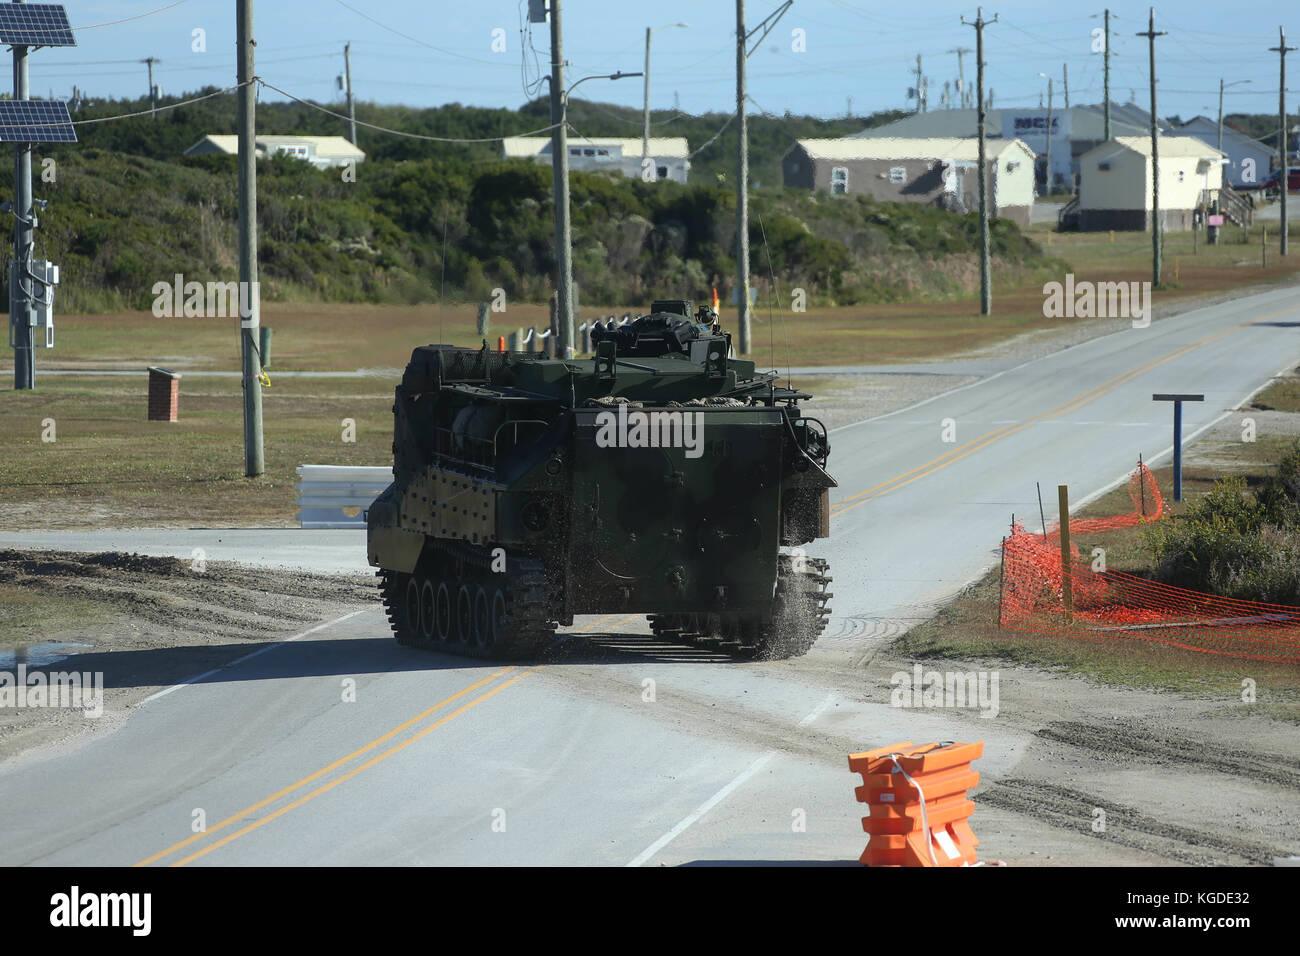 An AAV-P7/A1 assault amphibious vehicle (AAV) crosses the road to await the arrival of other AAVs during a training exercise at Camp Lejeune, N.C., Oc Stock Photo